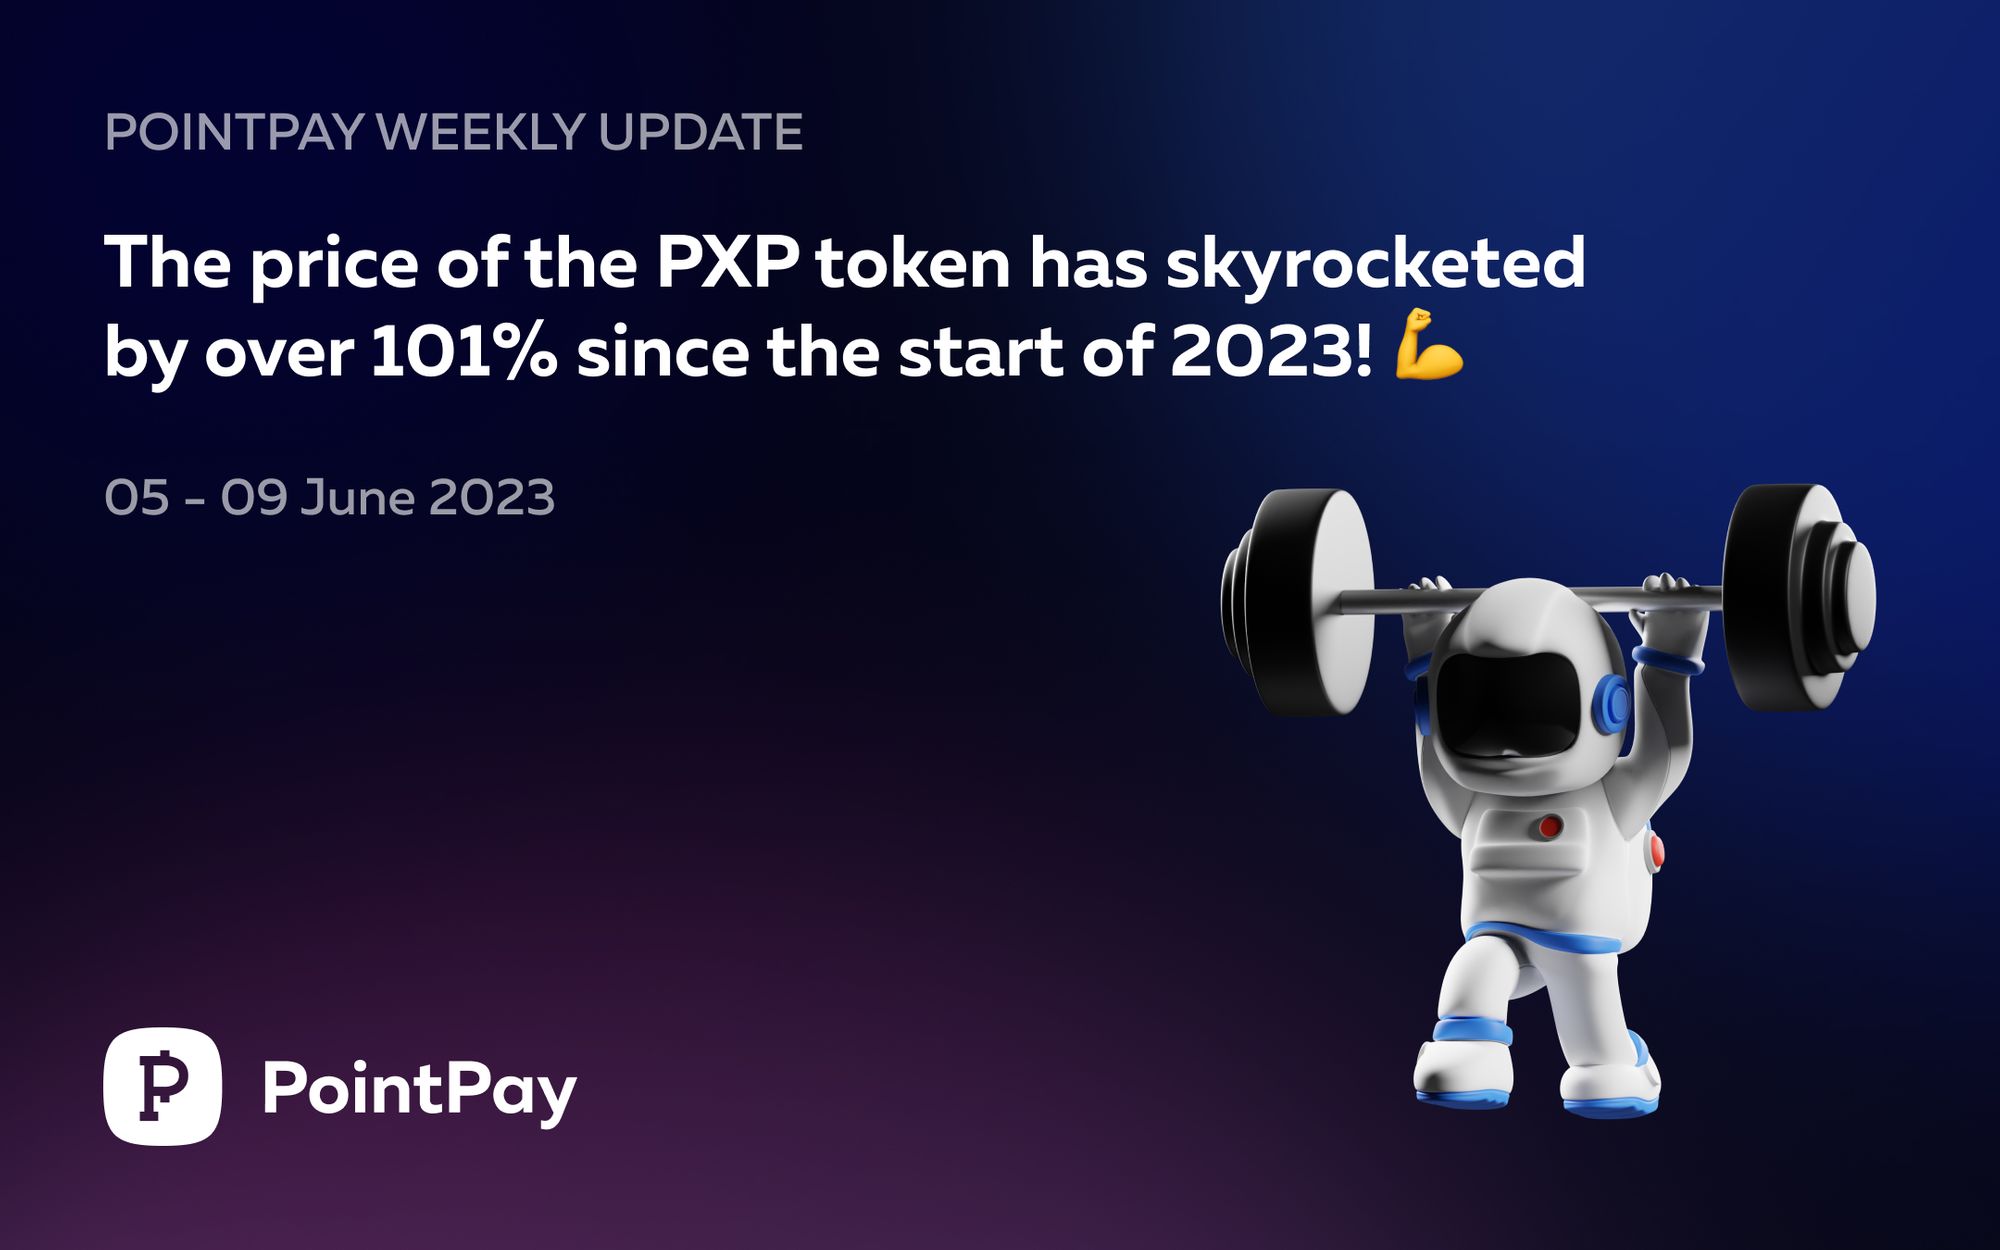 PointPay Weekly Update (5 - 9 June 2023)